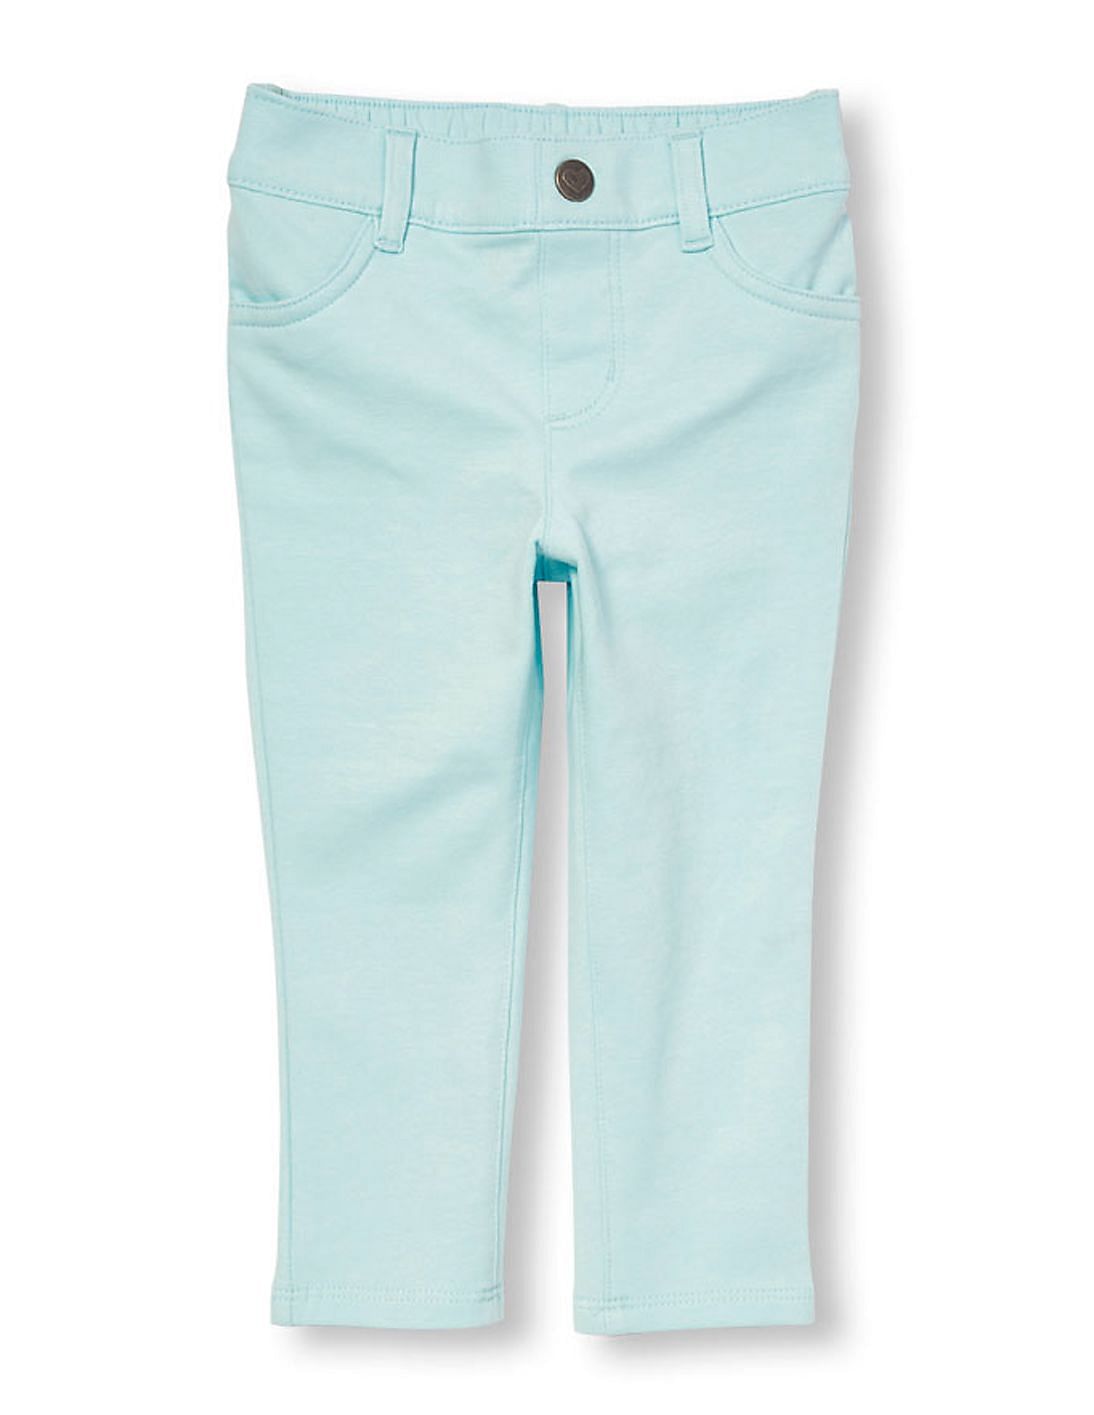 Buy The Children's Place Girls Blue Solid Knit Jeggings - NNNOW.com